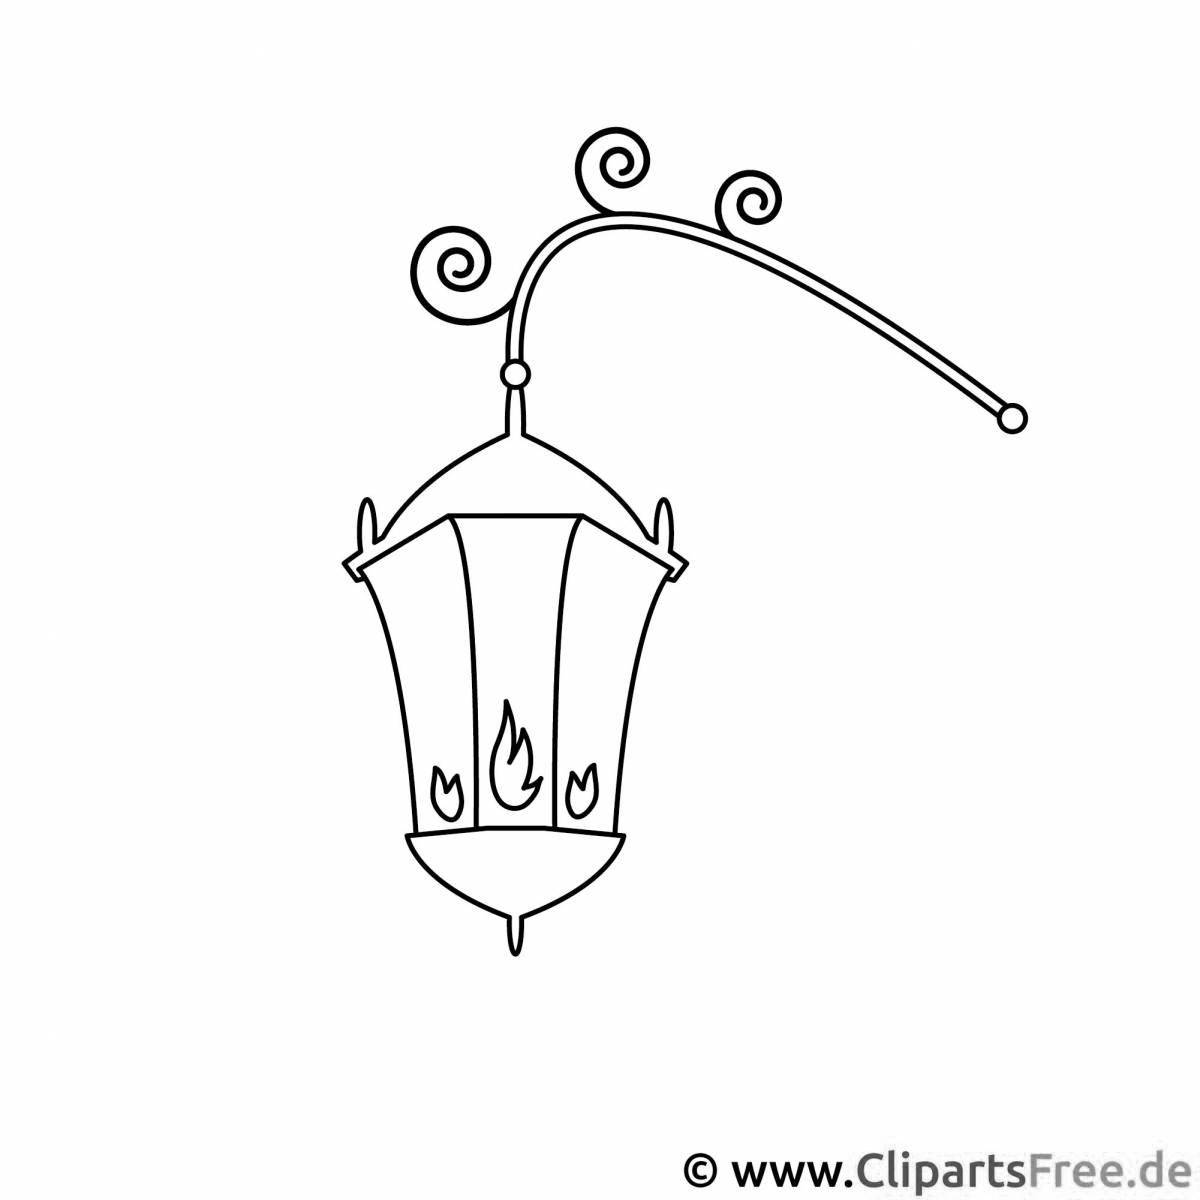 Cute lantern coloring page for kids